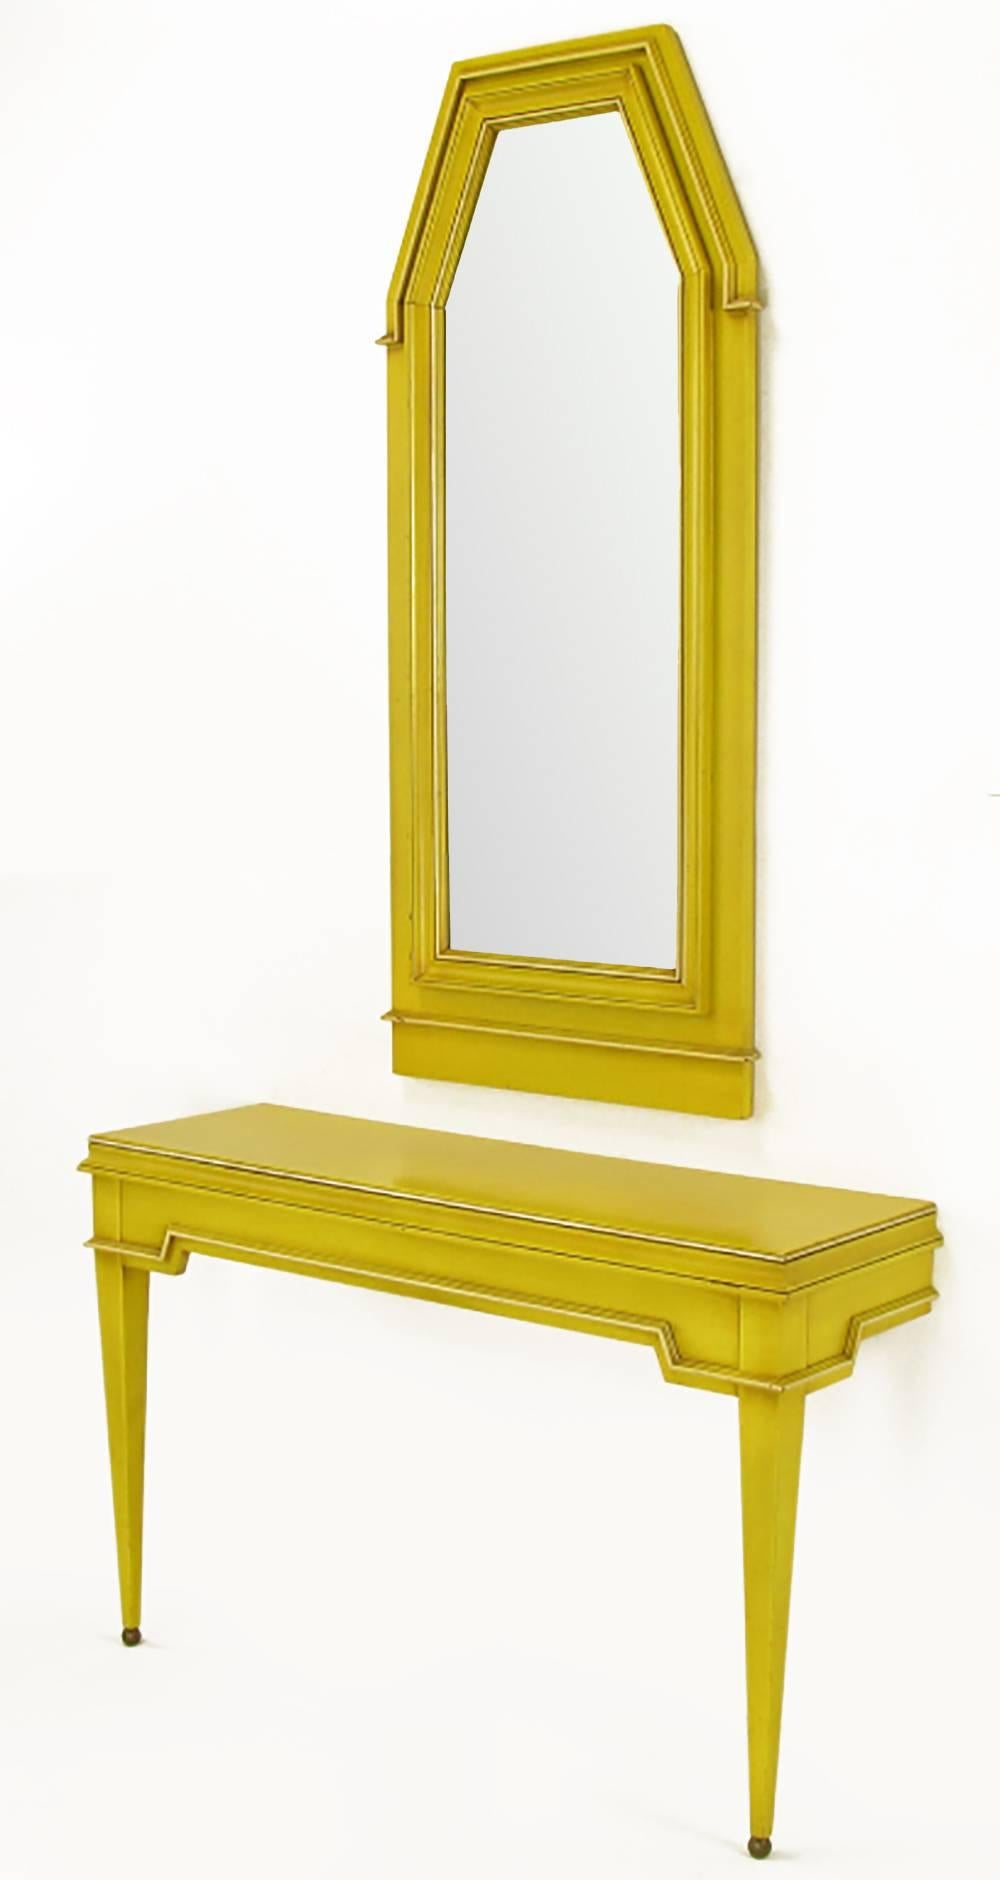 Elegant empire style wall-mounted console, with spherical solid brass feet, and matching pentagonal mirror. Finished in yellow lacquer with an umber glaze. Wonderful contrast of color and style that works with both traditional and contemporary